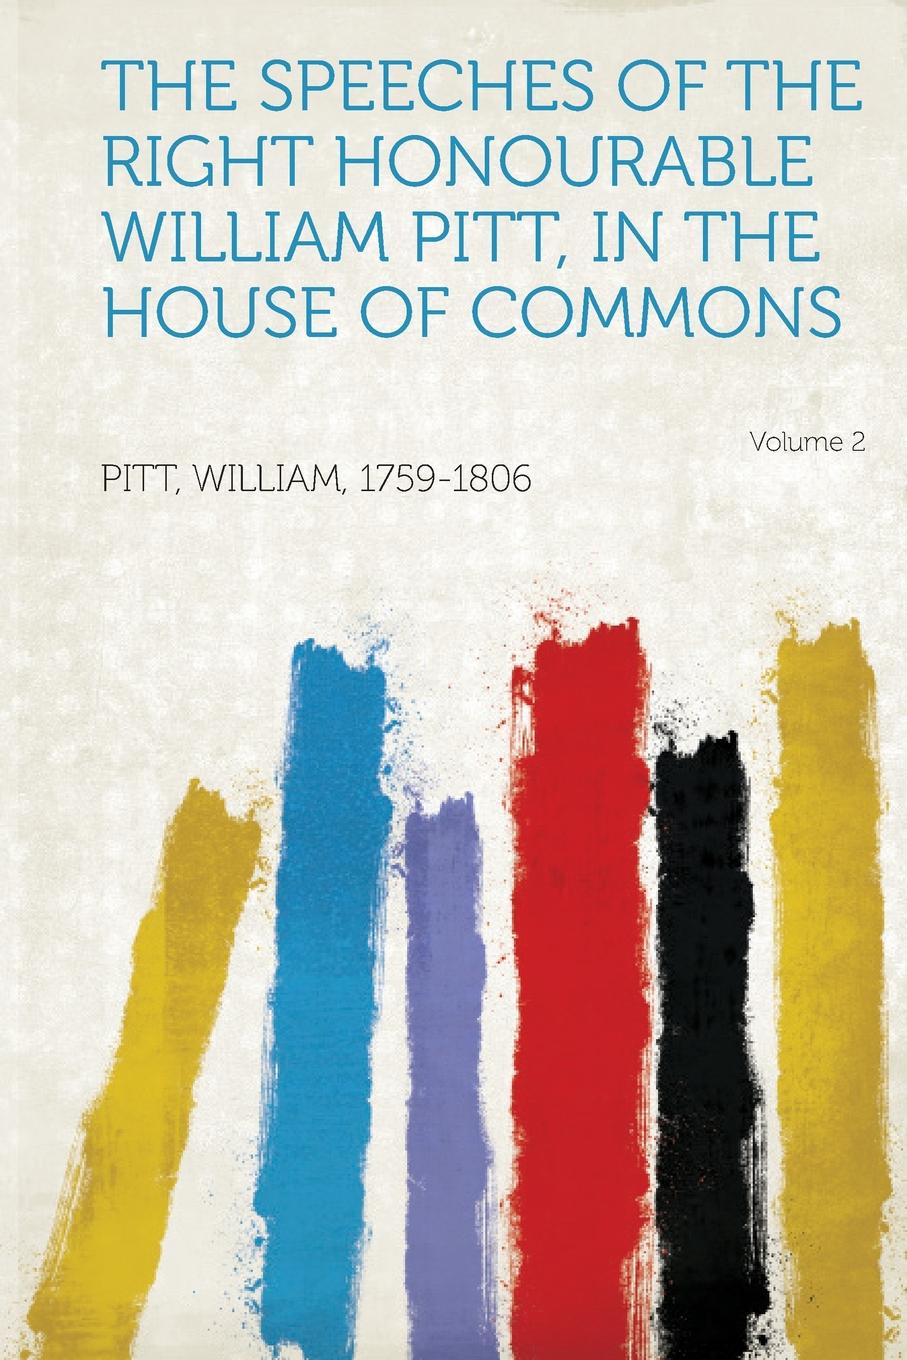 The Speeches of the Right Honourable William Pitt, in the House of Commons Volume 2